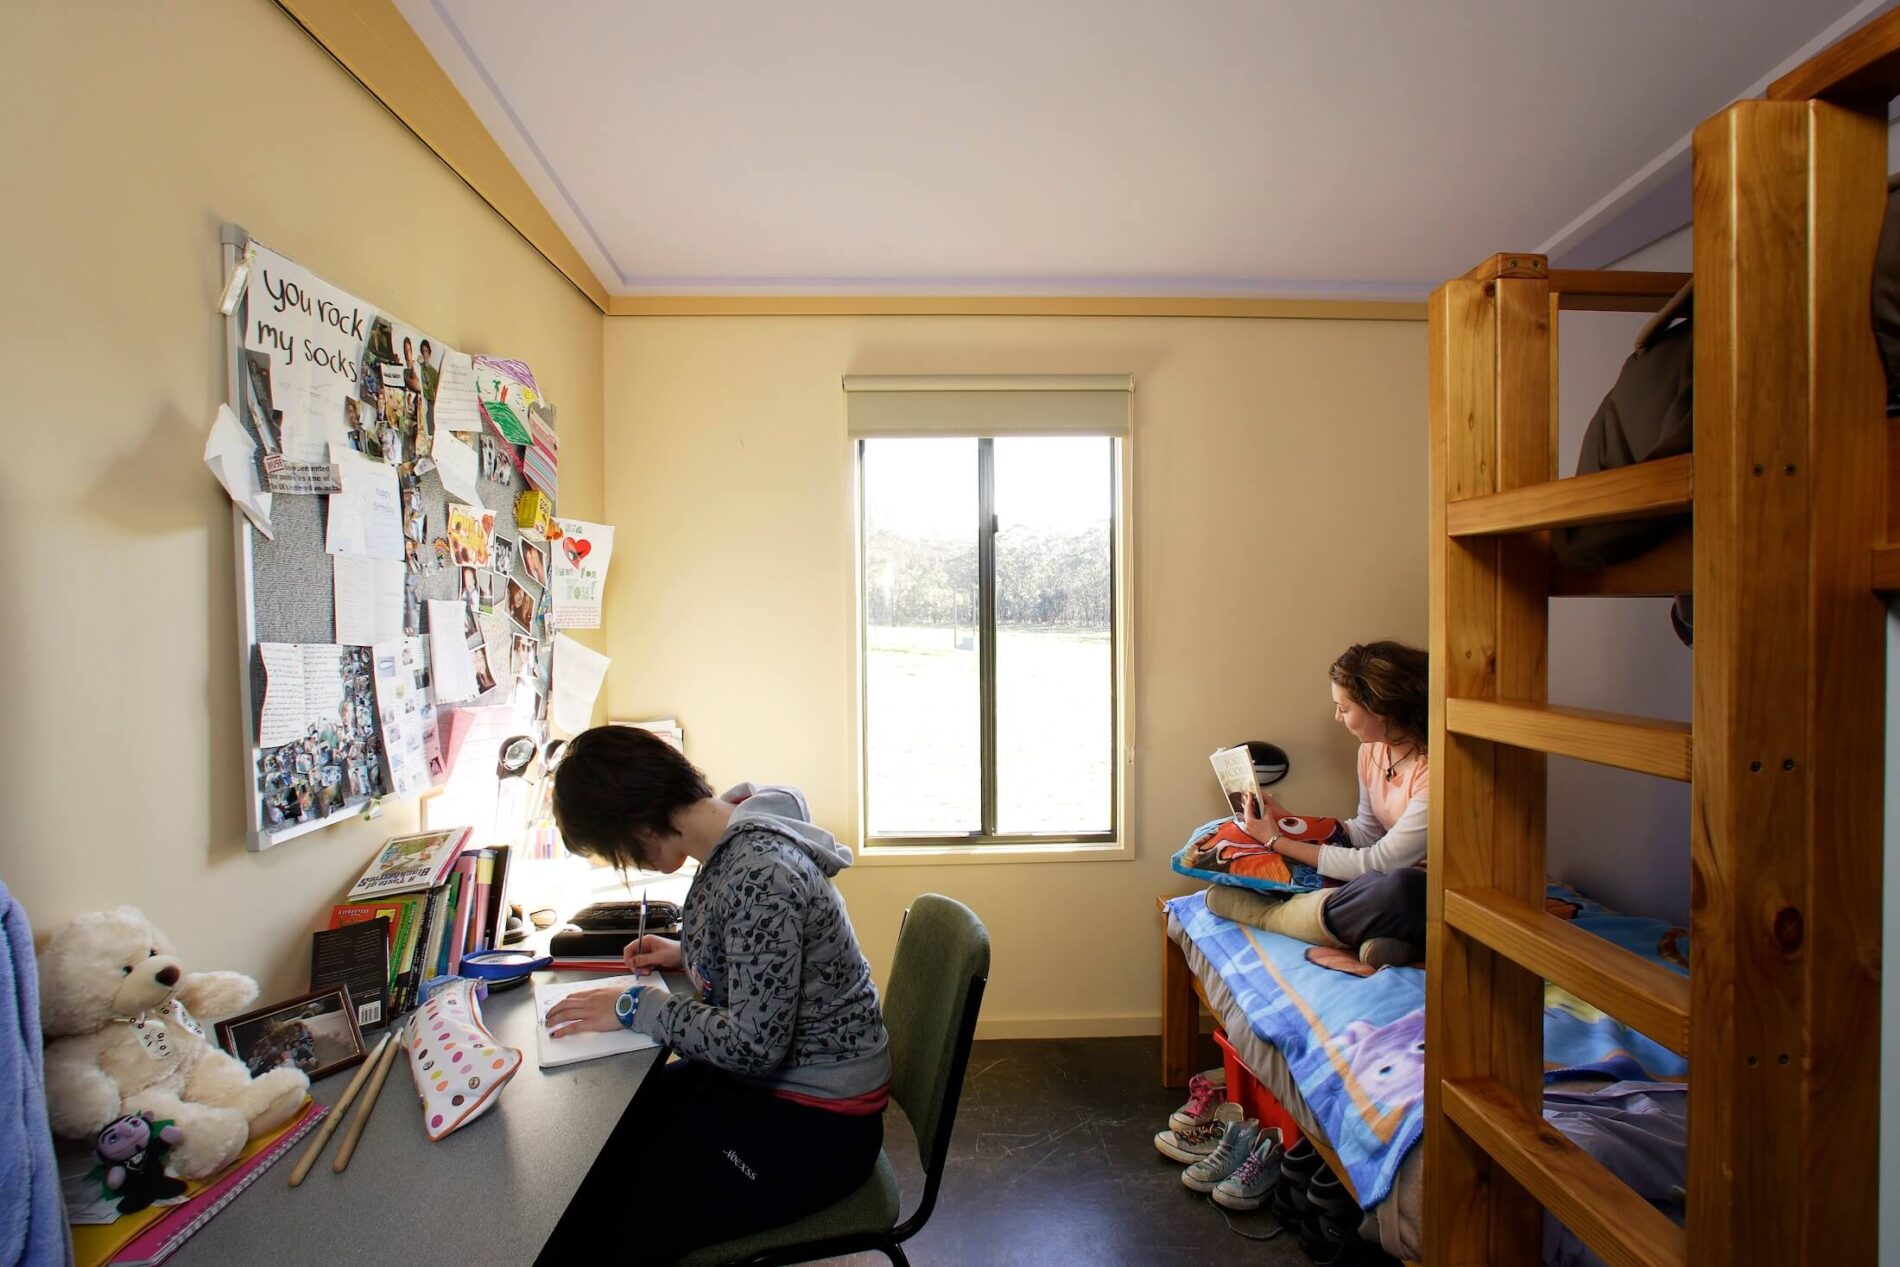 Students sit at desk writing, and on bed, reading in student accommodation